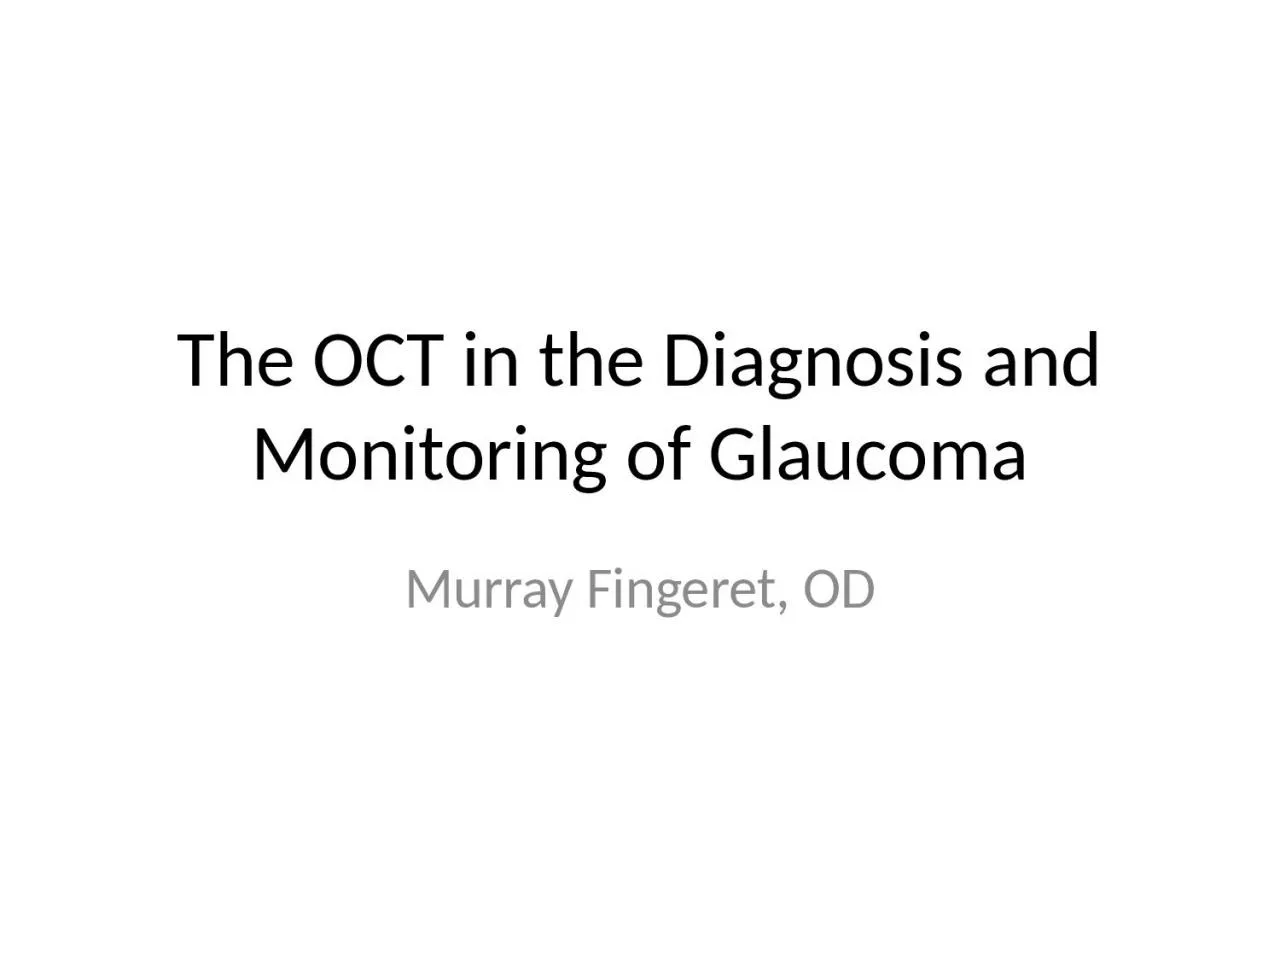 The OCT in the Diagnosis